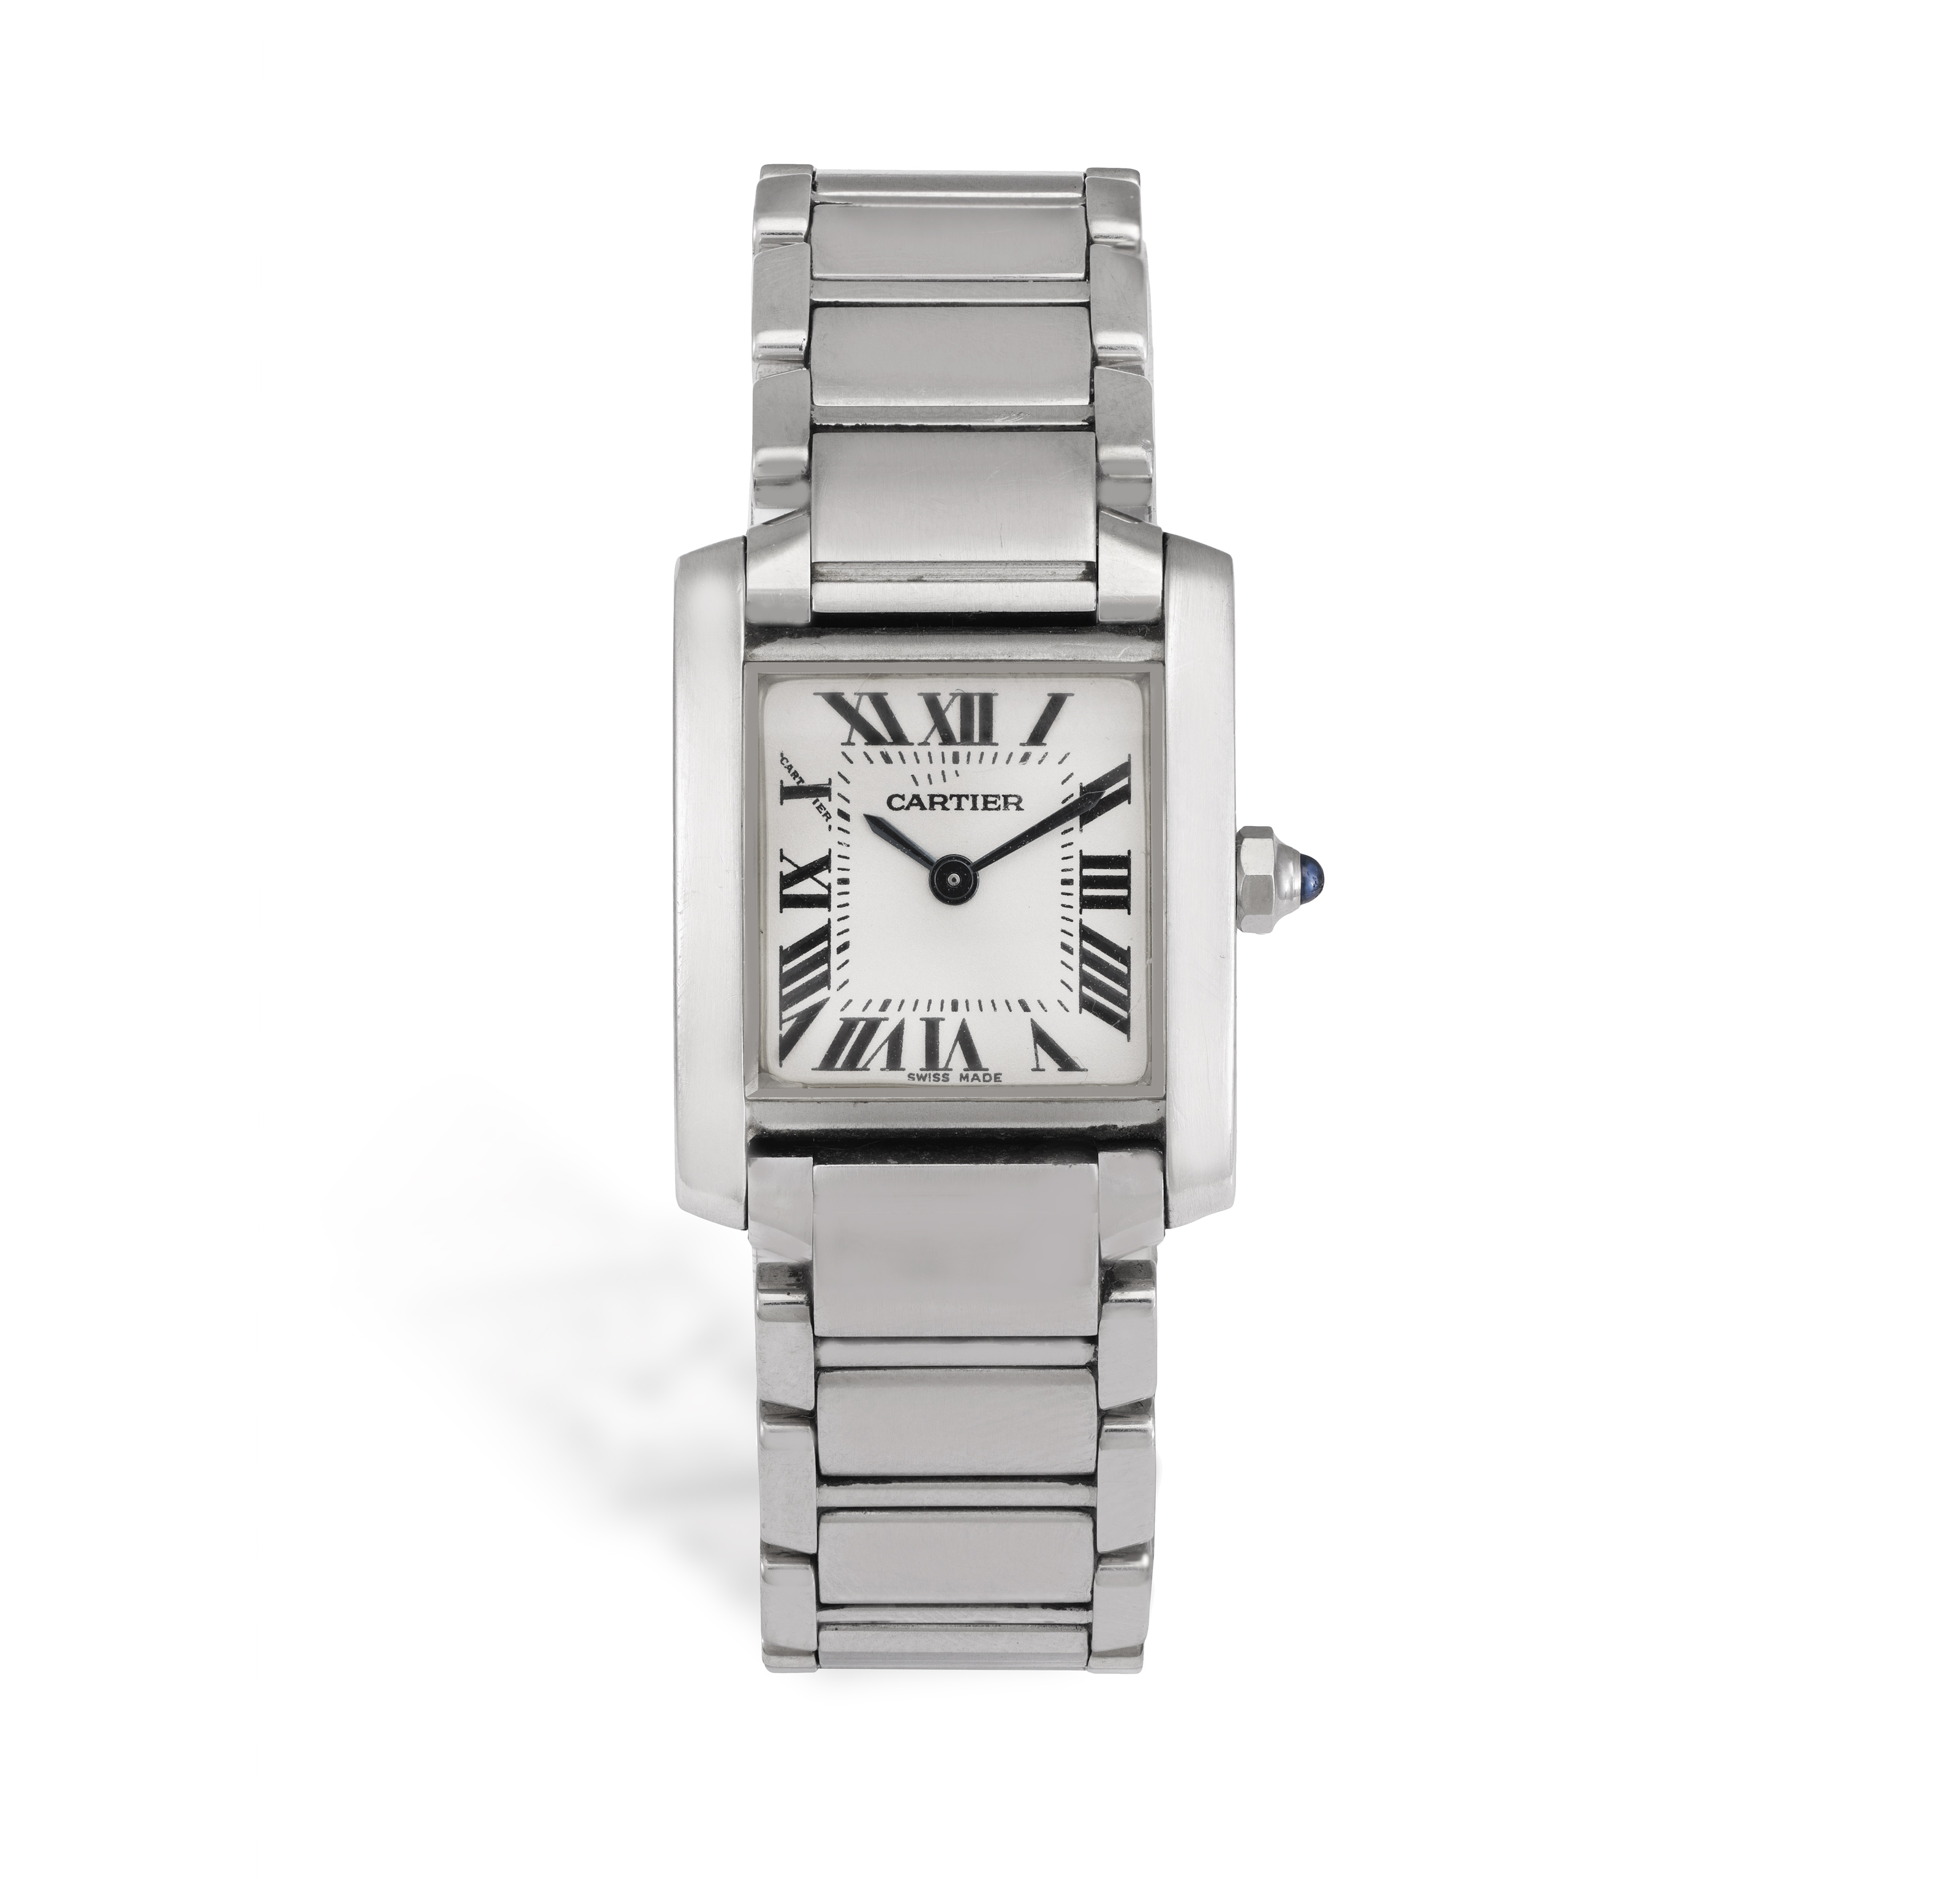 A LADY'S STAINLESS STEEL 'TANK FRANCAISE' QUARTZ BRACELET WATCH, BY CARTIER 4-jewel Cal. 057 - Image 2 of 5